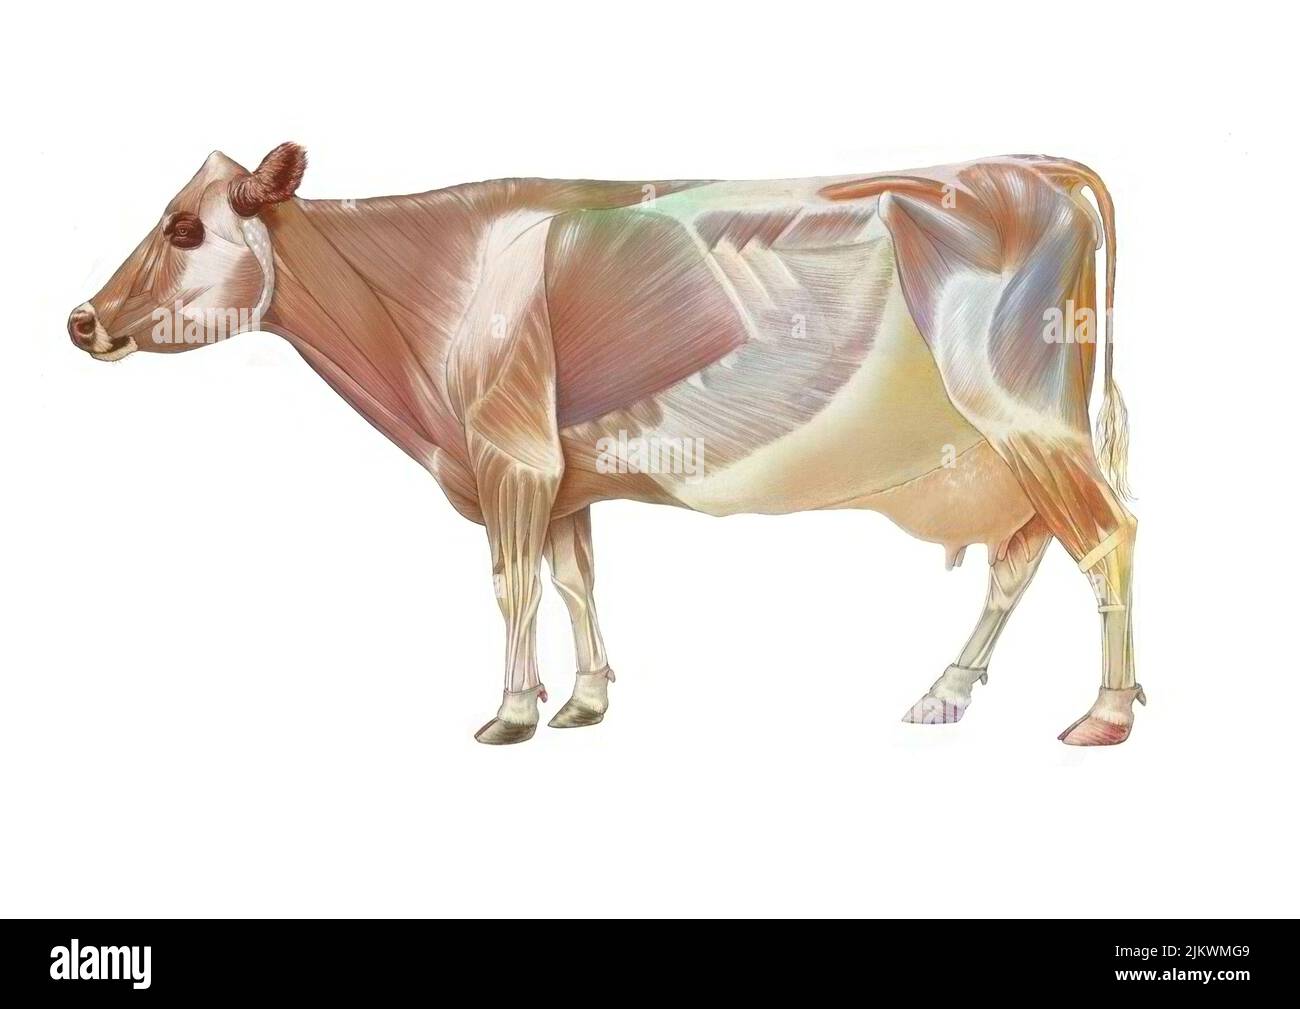 Cow anatomy with its muscular system. Stock Photo